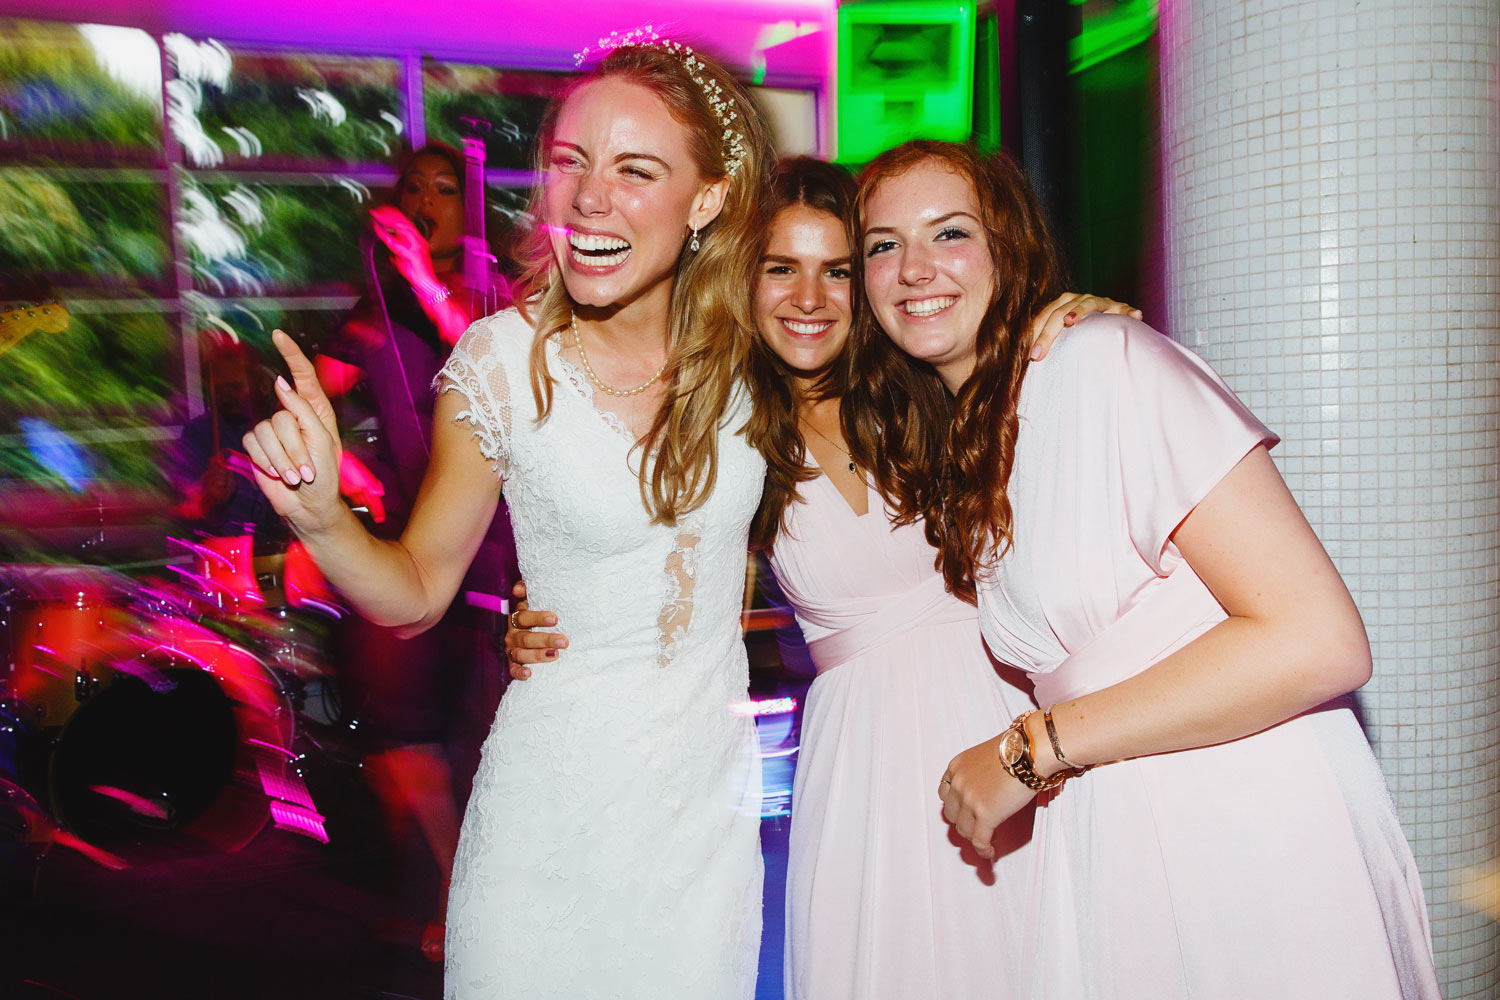 Wedding guests dance at the Roof Gardens in Kensington - London wedding photographer